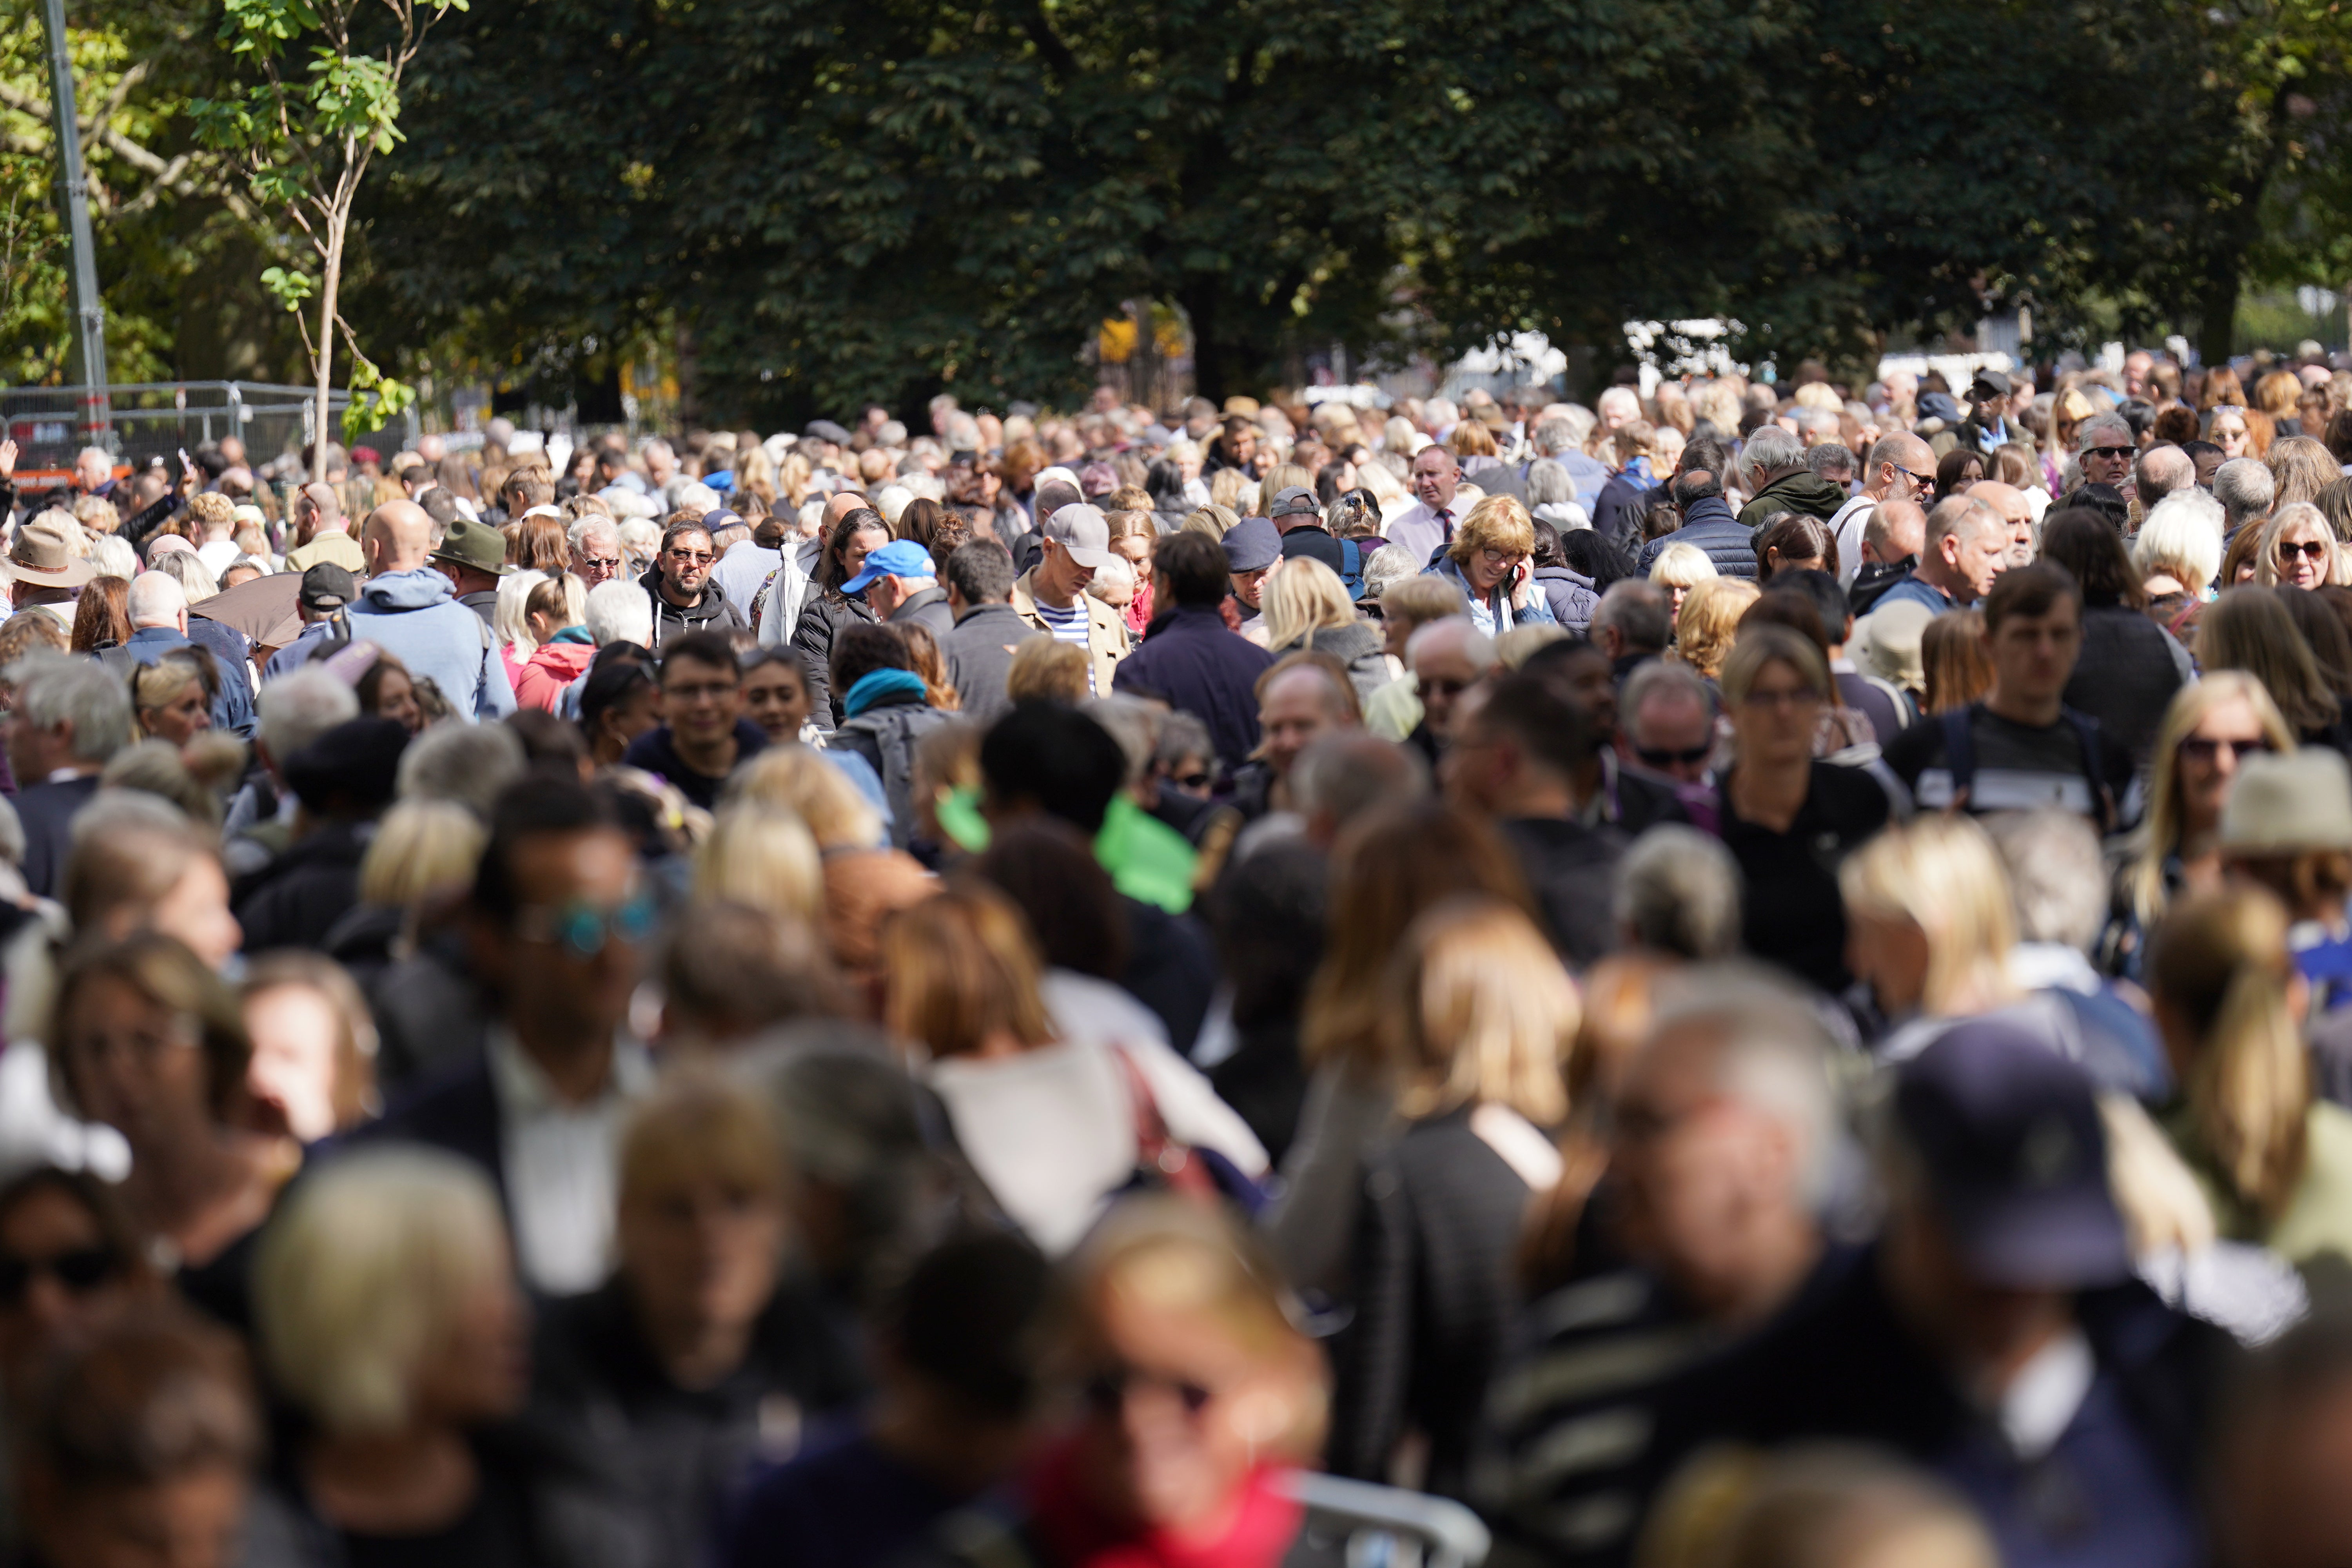 Members of the public in the queue at Southwark Park in London, as they wait to view Queen Elizabeth II lying in state ahead of her funeral on Monday. Picture date: Friday September 16, 2022.